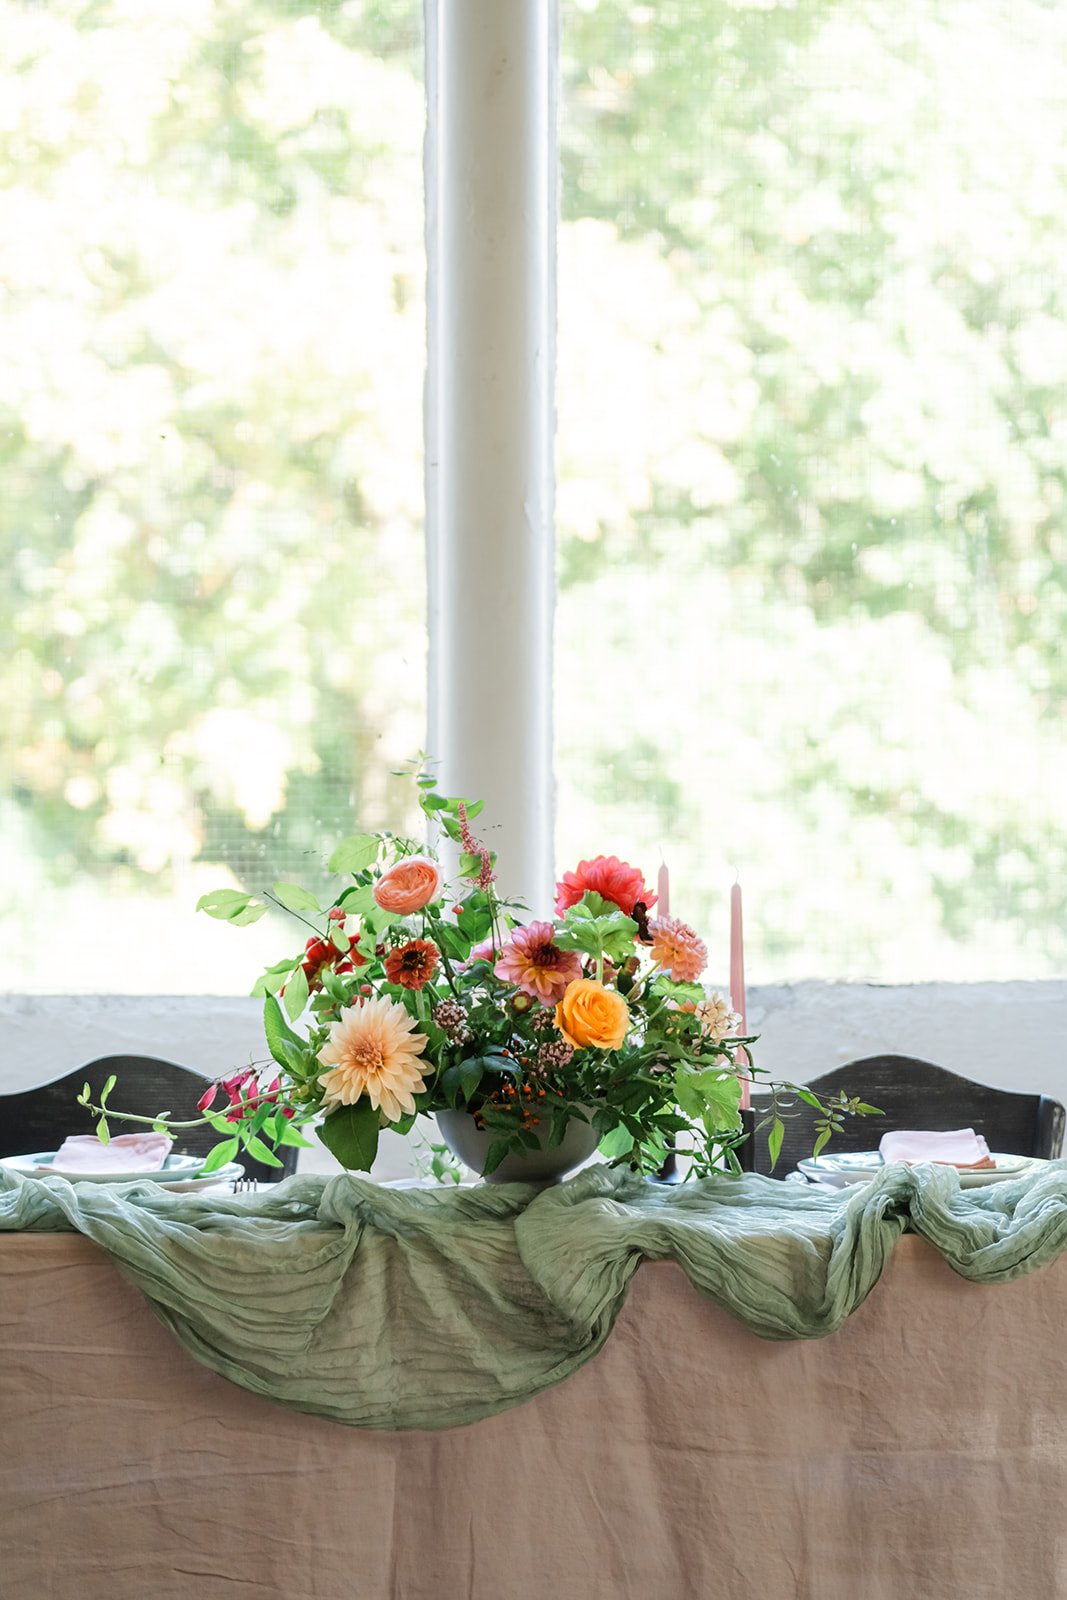 Table dressed with green linen and a foam free flower arrangement